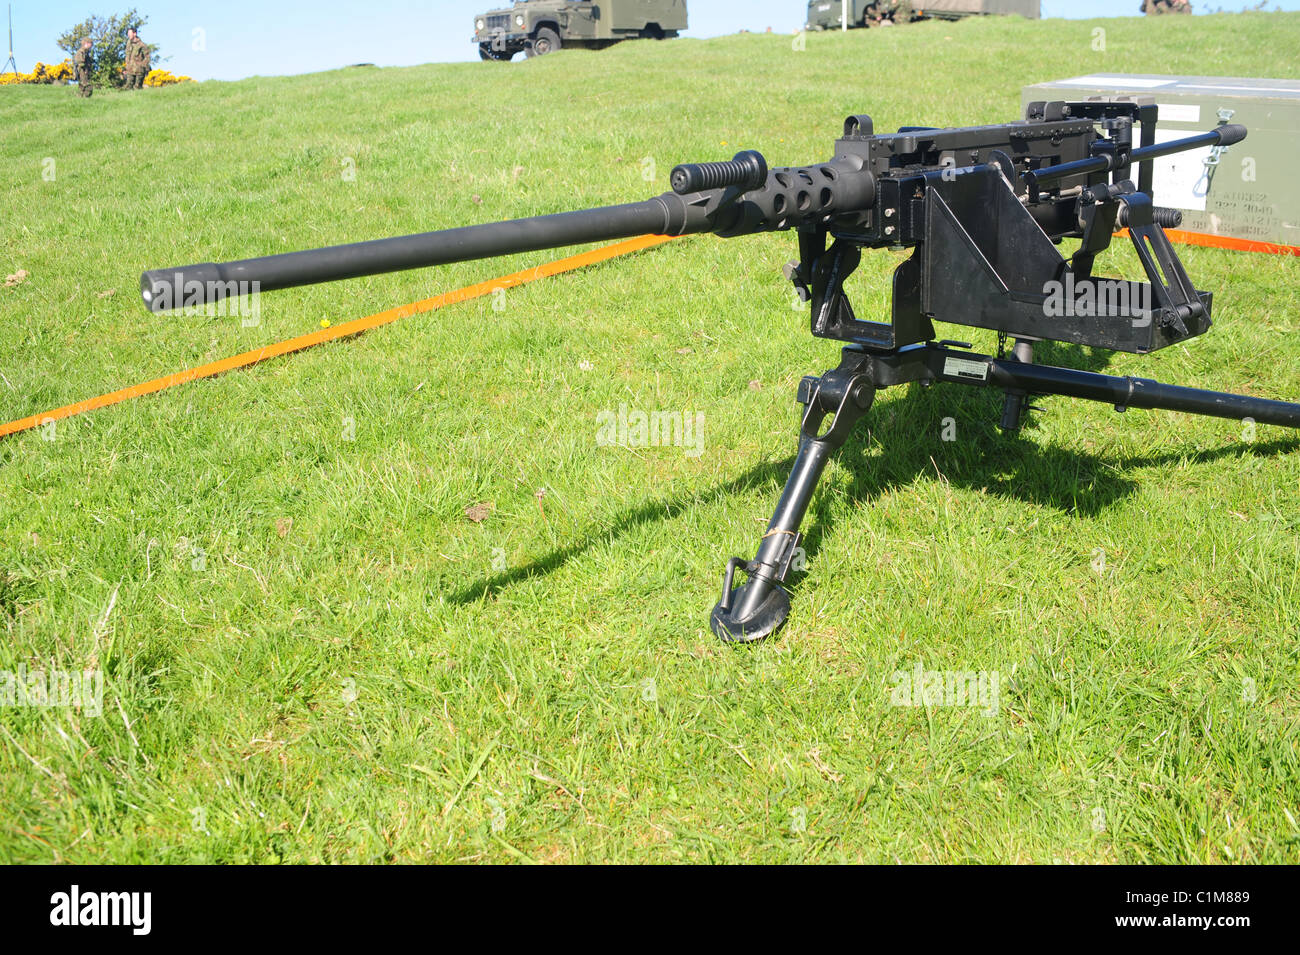 The powerful L1A1 12.7 mm (.50) Heavy Machine Gun (HMG) is an updated  version of the Browning M2 'Fifty-cal' - recognised as one Stock Photo -  Alamy